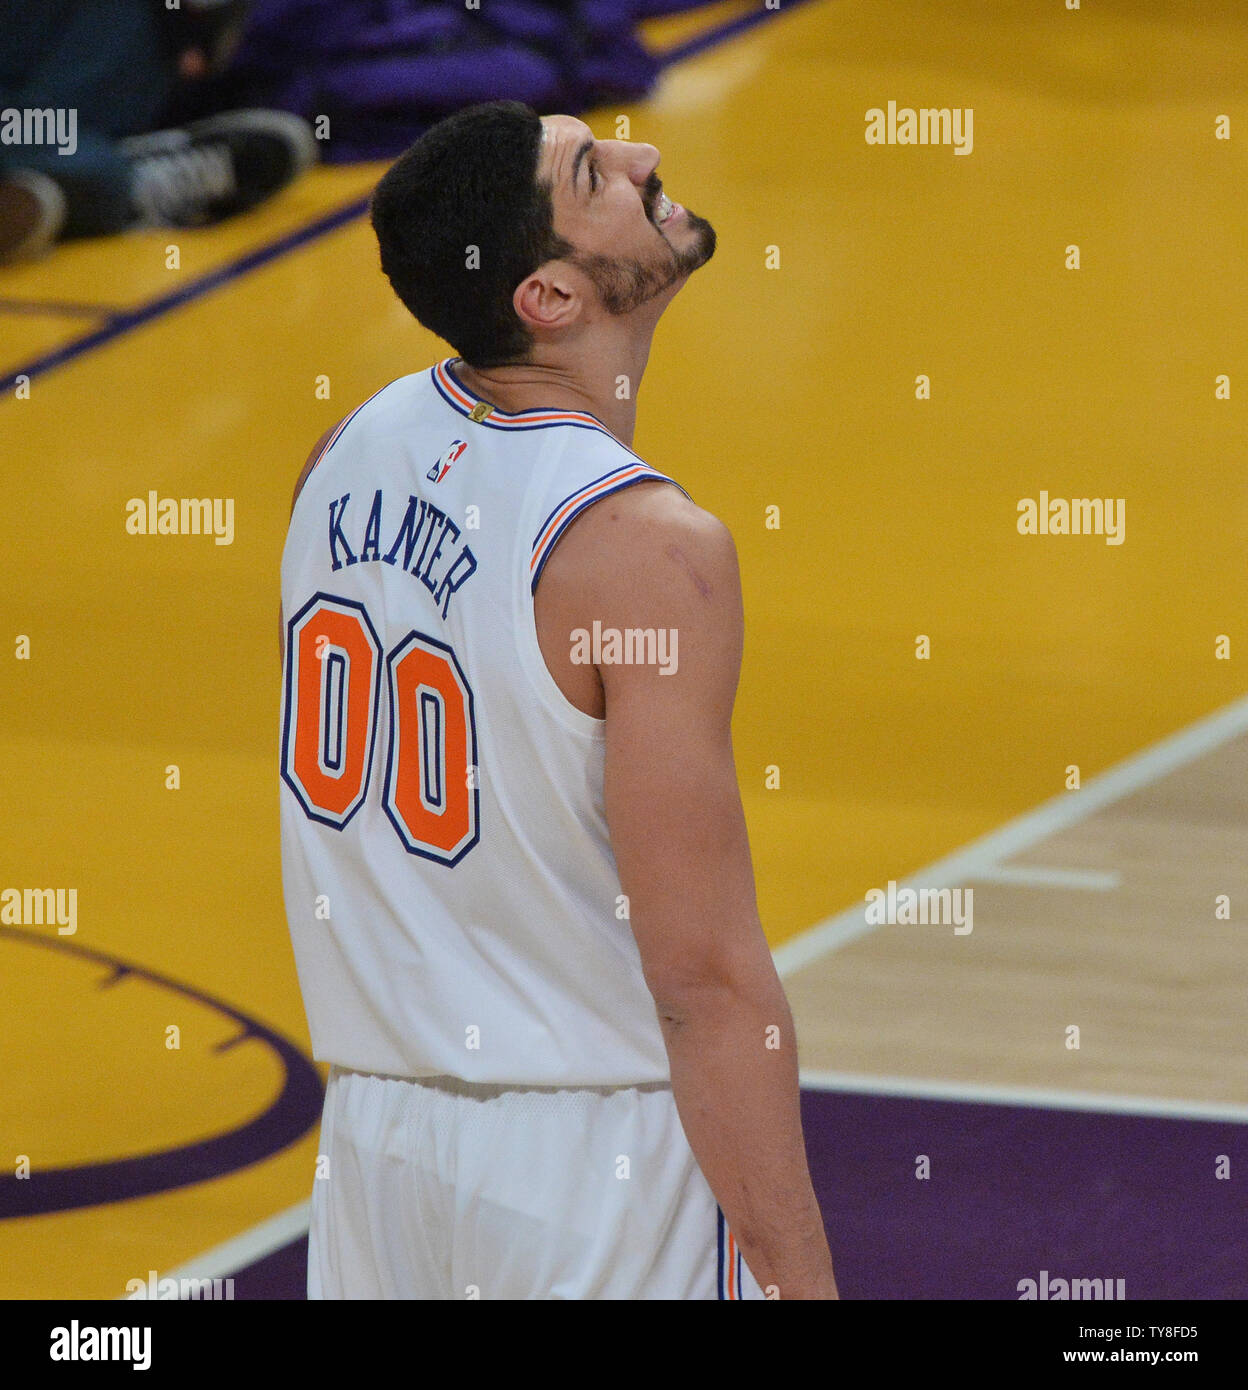 New York Knicks center Enes Kanter is pictured in an NBA game in Los Angeles against the Lakers at Staples Center in Los Angeles on January 4, 2019. Kanter, a native of Turkey informs the Knicks he will not be traveling with the team to London later this month to take on the Washington Wizards out of fear he could be killed by Turkish spies. Kanter, an outspoken critic of the Turkish government, especially of hardline President Erdogan now feels his life would be in danger if he were to Tavel overseas. 'Sadly, I'm not going because of that freaking lunatic, the Turkish president,' Kanter told Stock Photo